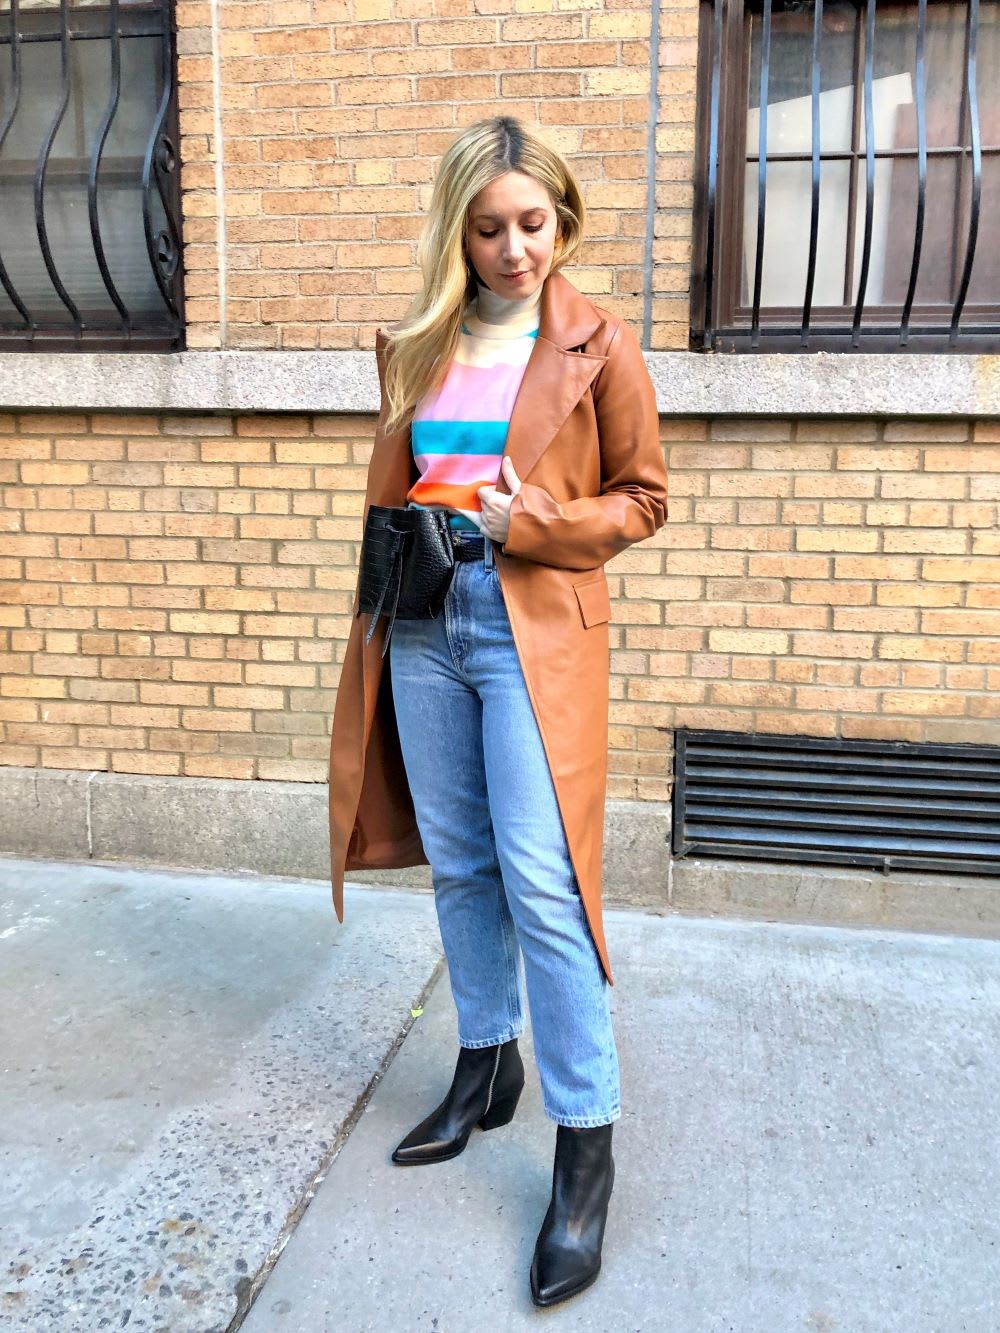 Lessons in Layering: 5 Outfit Ideas for Temperamental Spring Weather